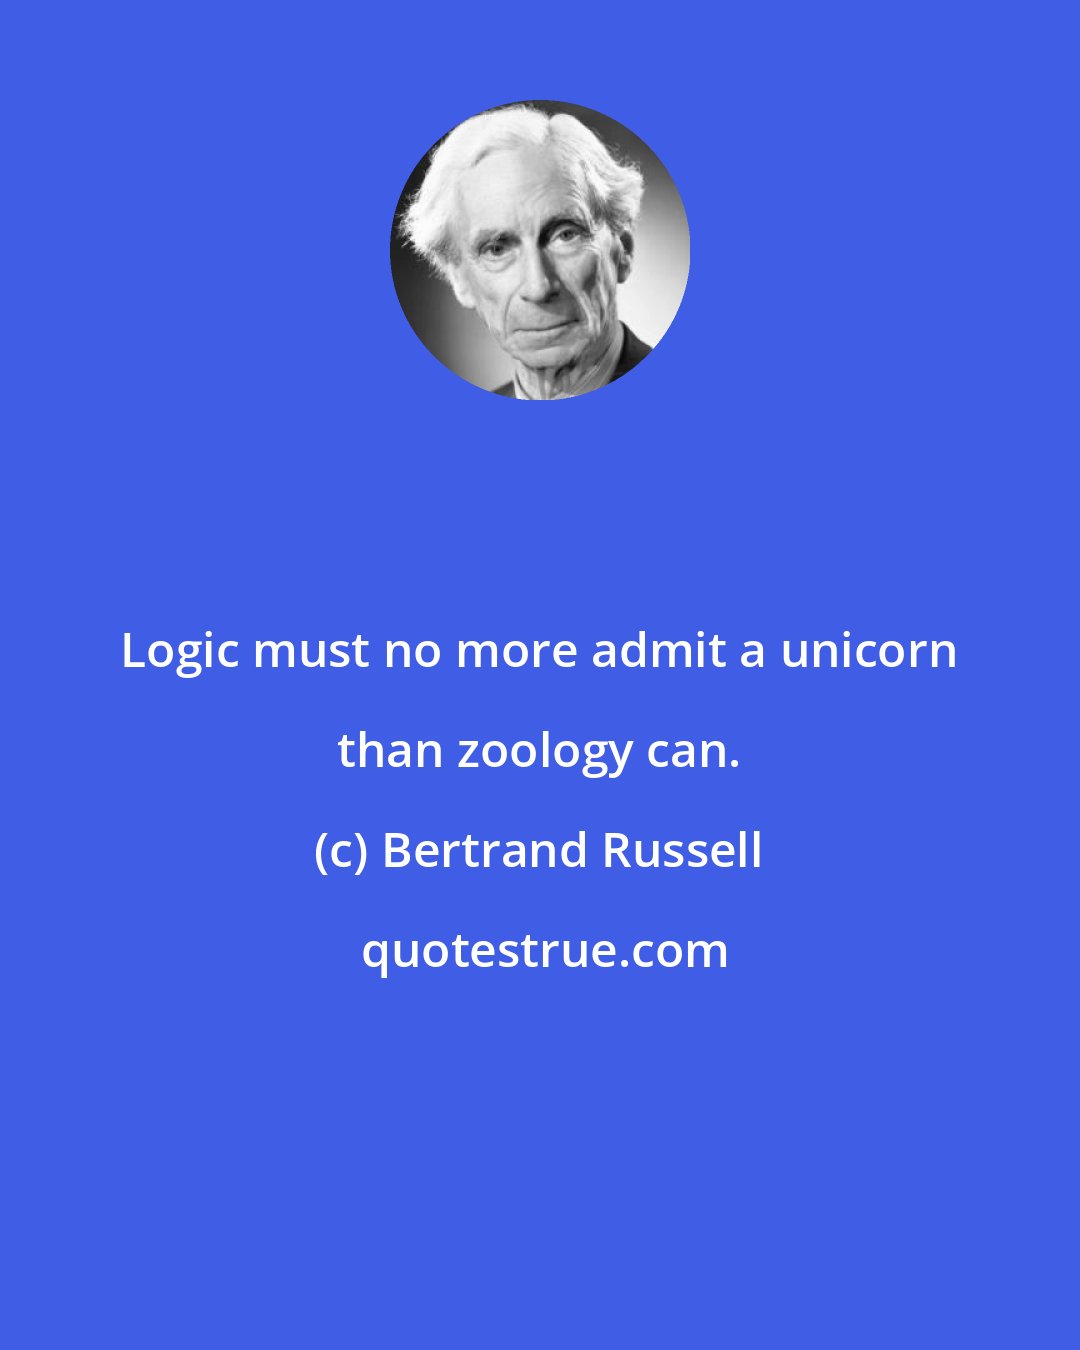 Bertrand Russell: Logic must no more admit a unicorn than zoology can.